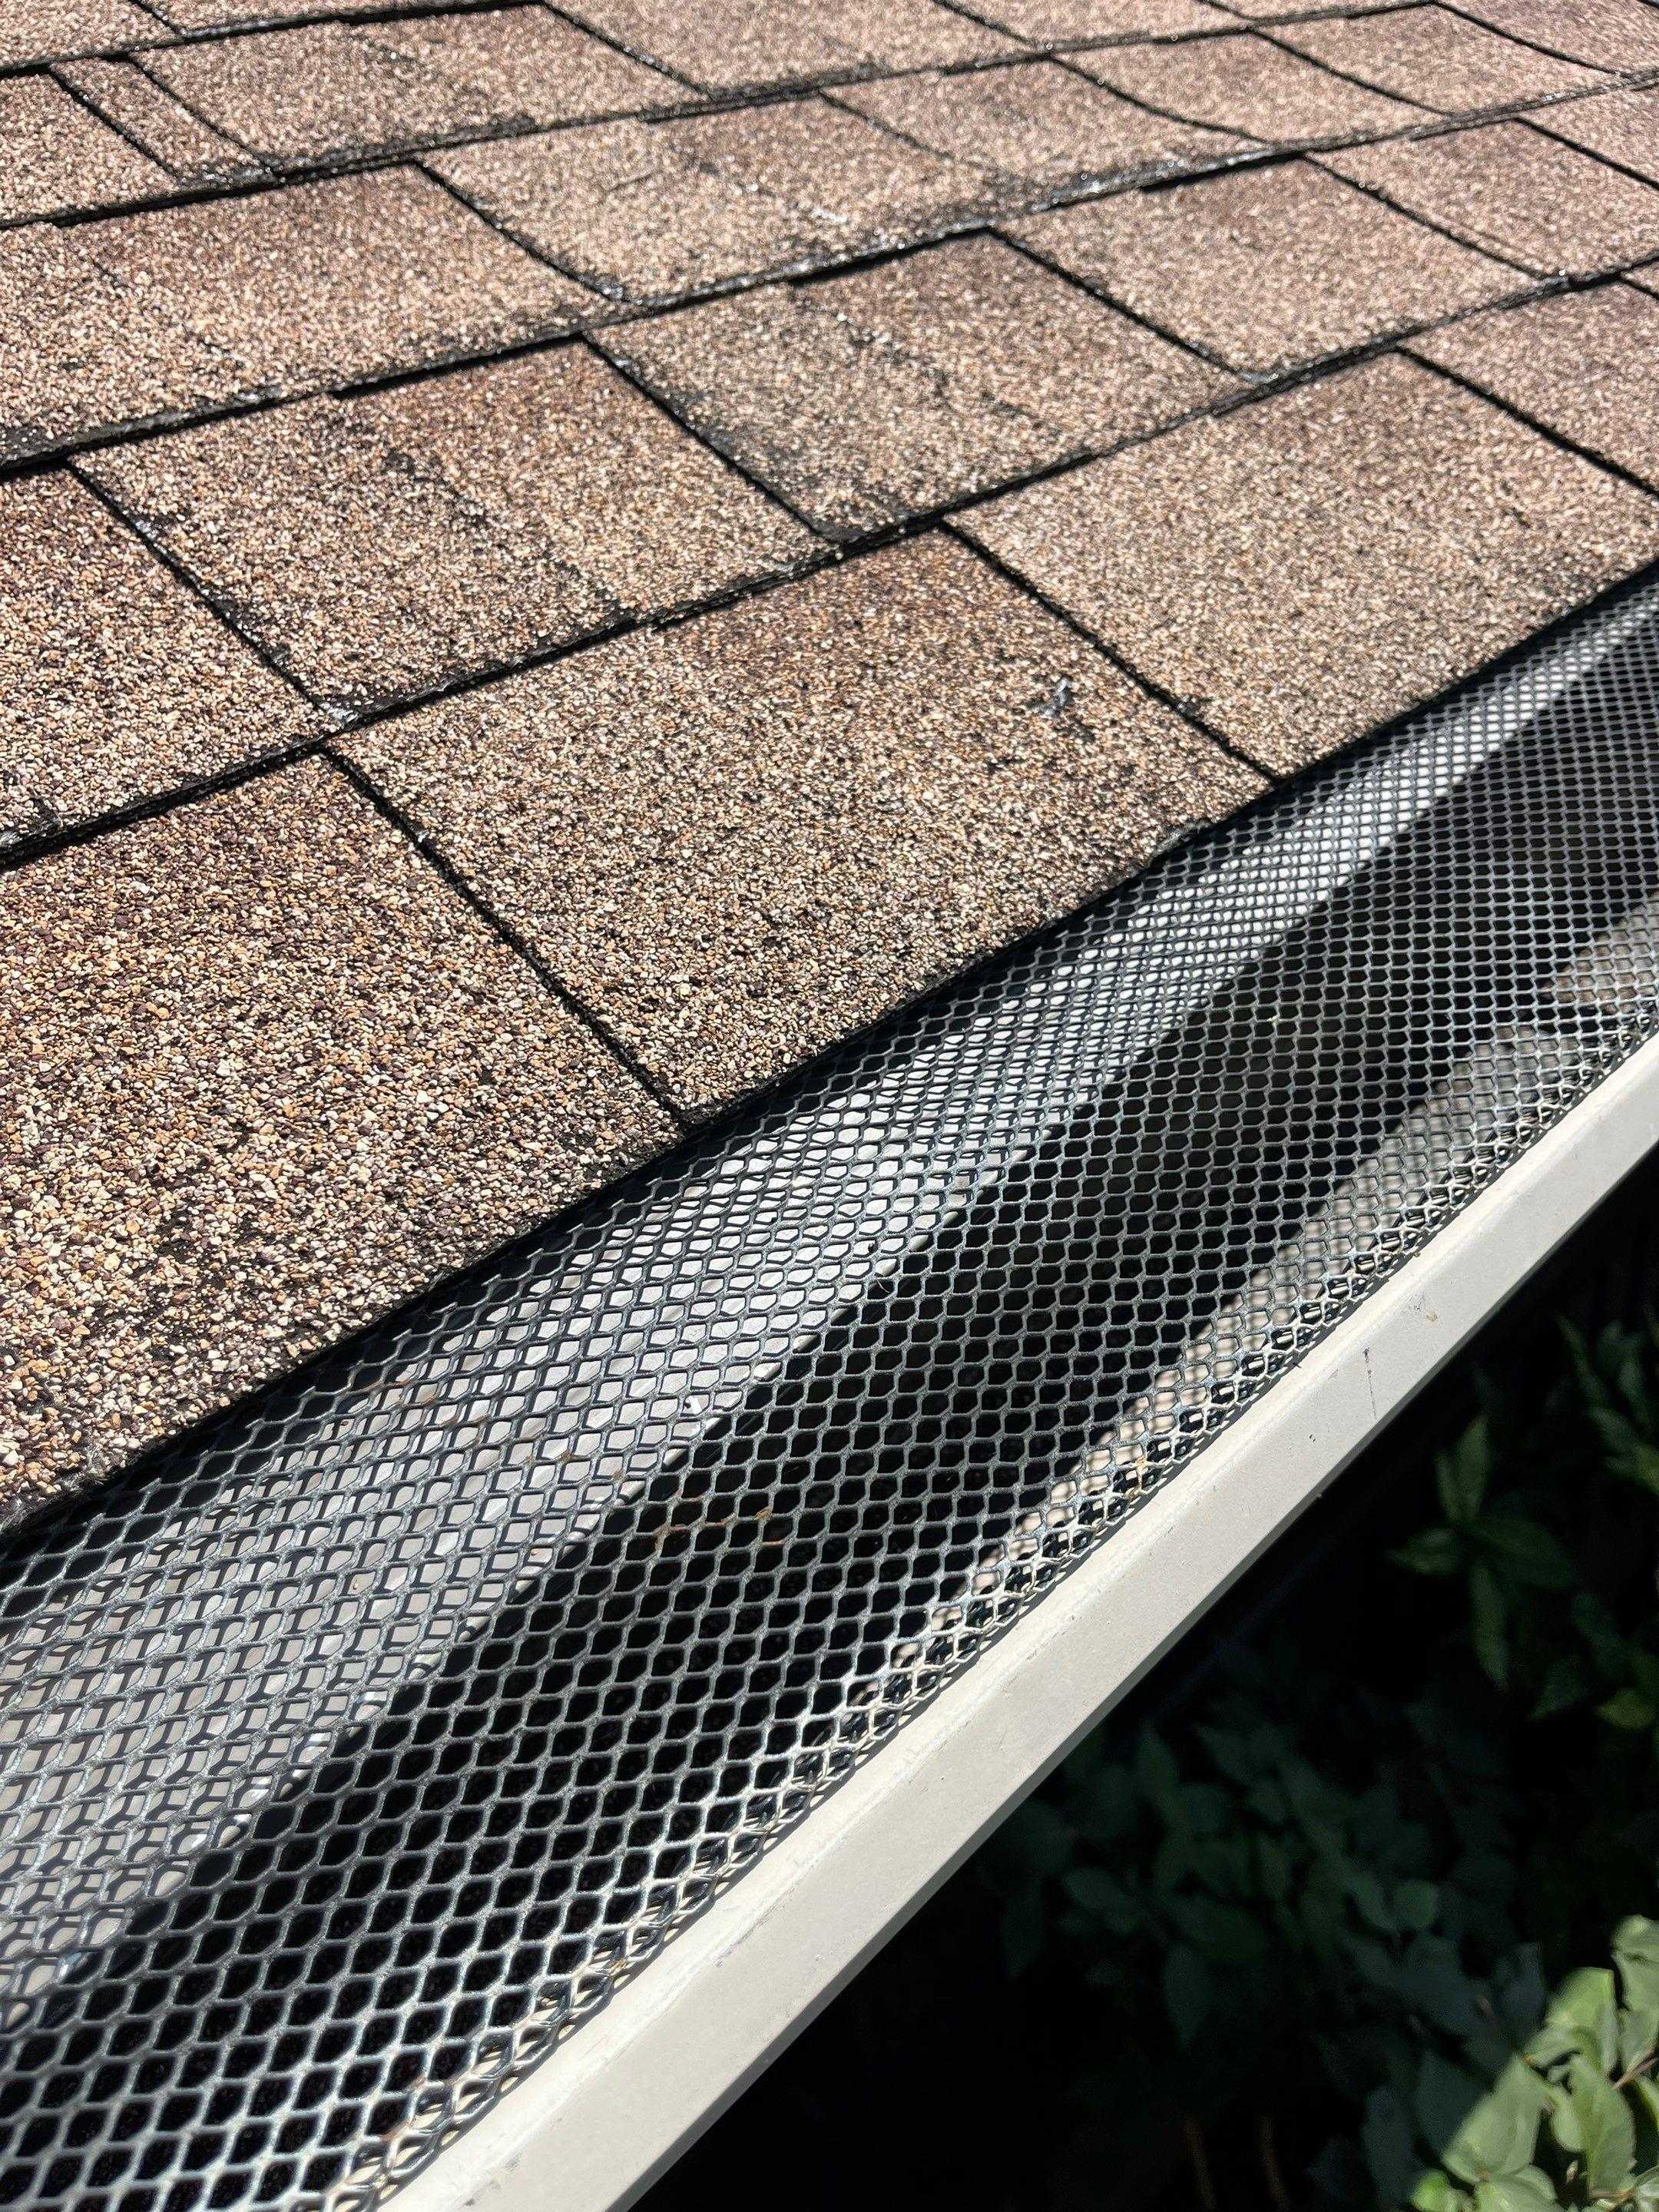 Drip edge coming out, needs to be secured